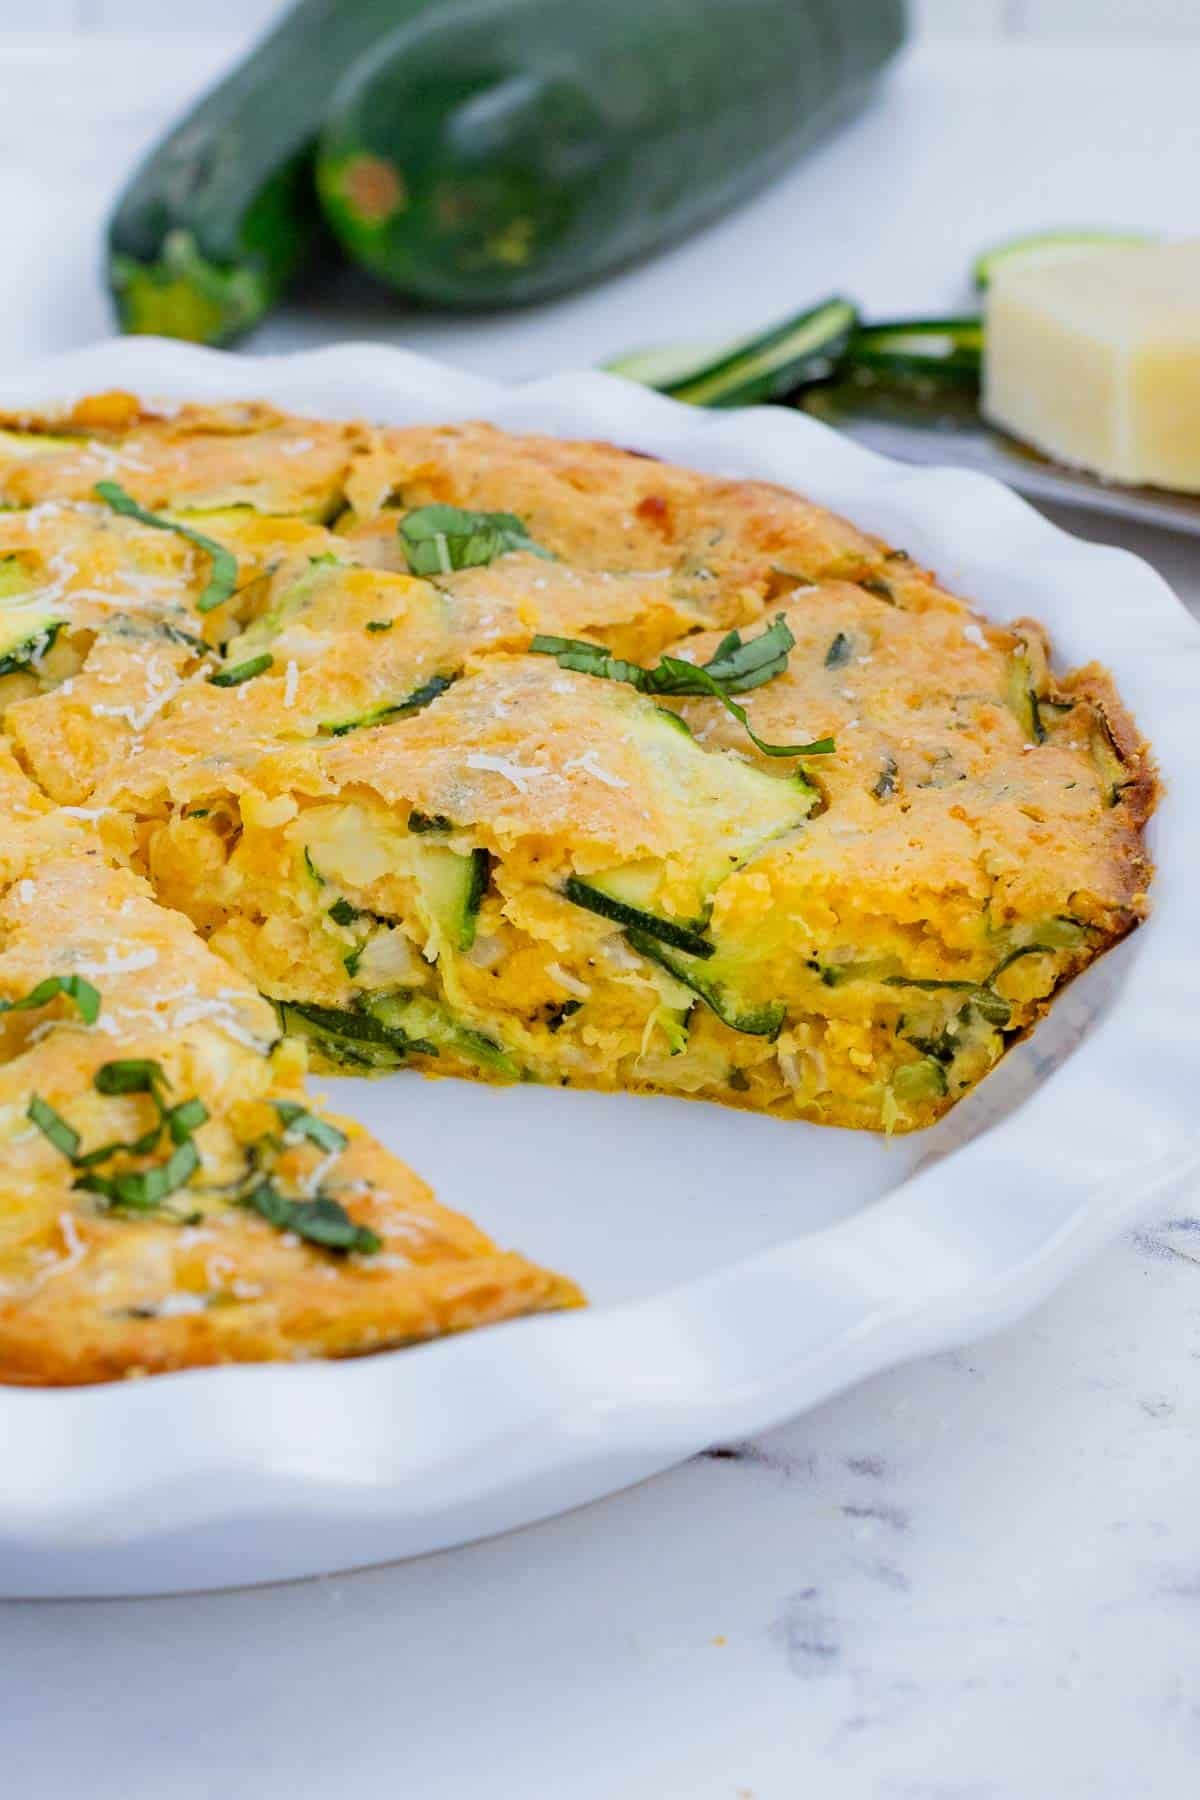 Zucchini pie is made with zucchini, cheese, herbs, and eggs.